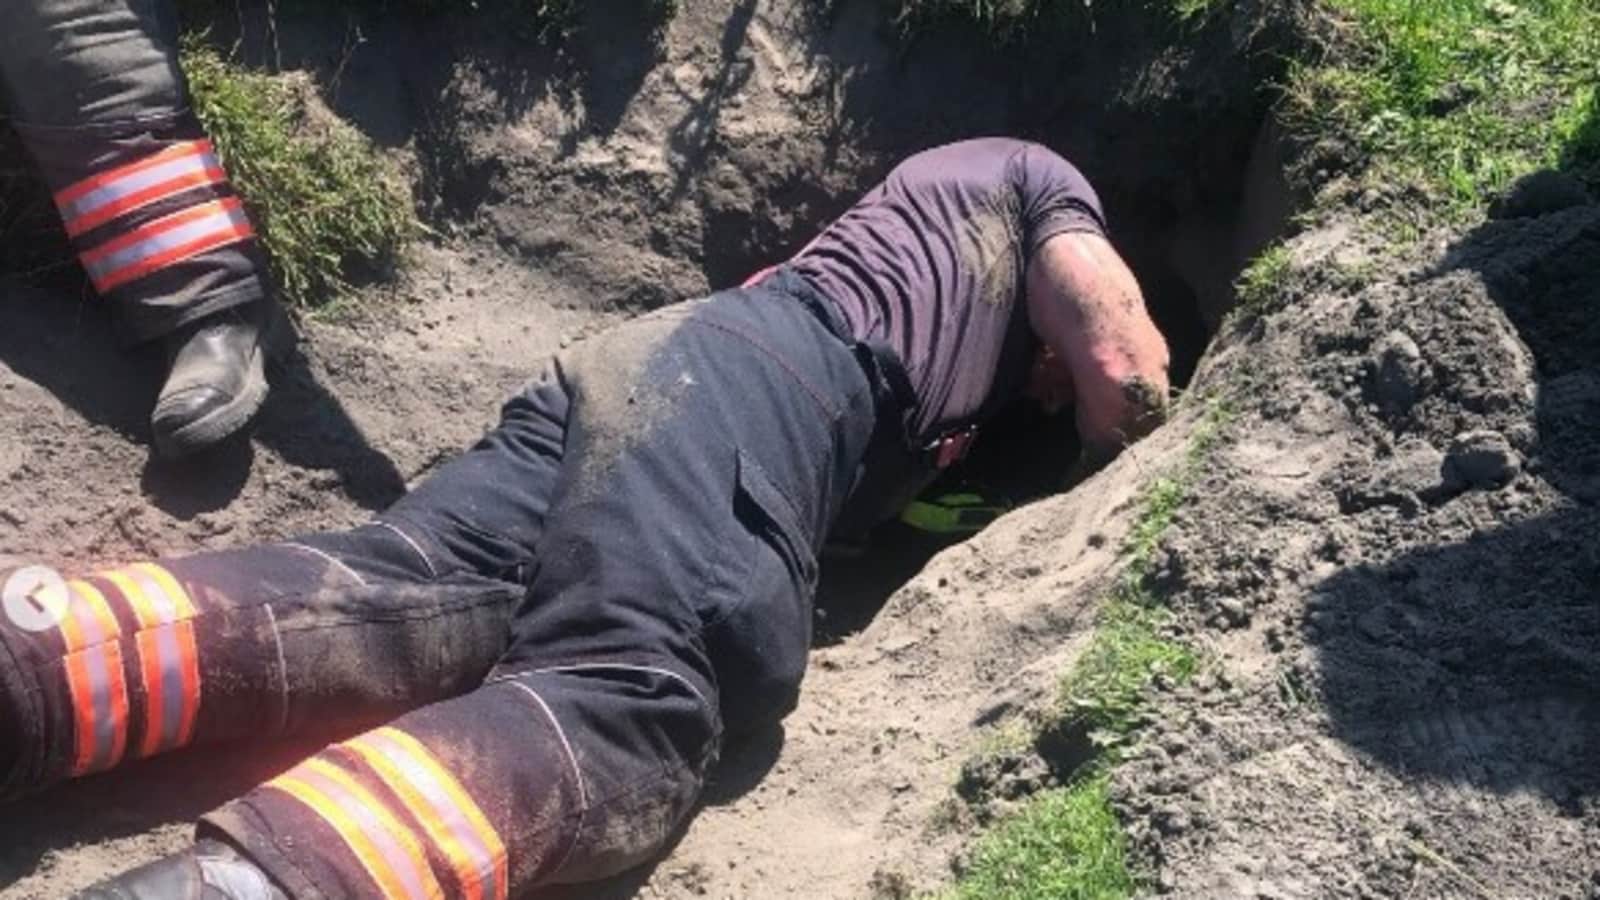 Dog falls into a rabbit hole, firefighters carry out 'pawfect' rescue